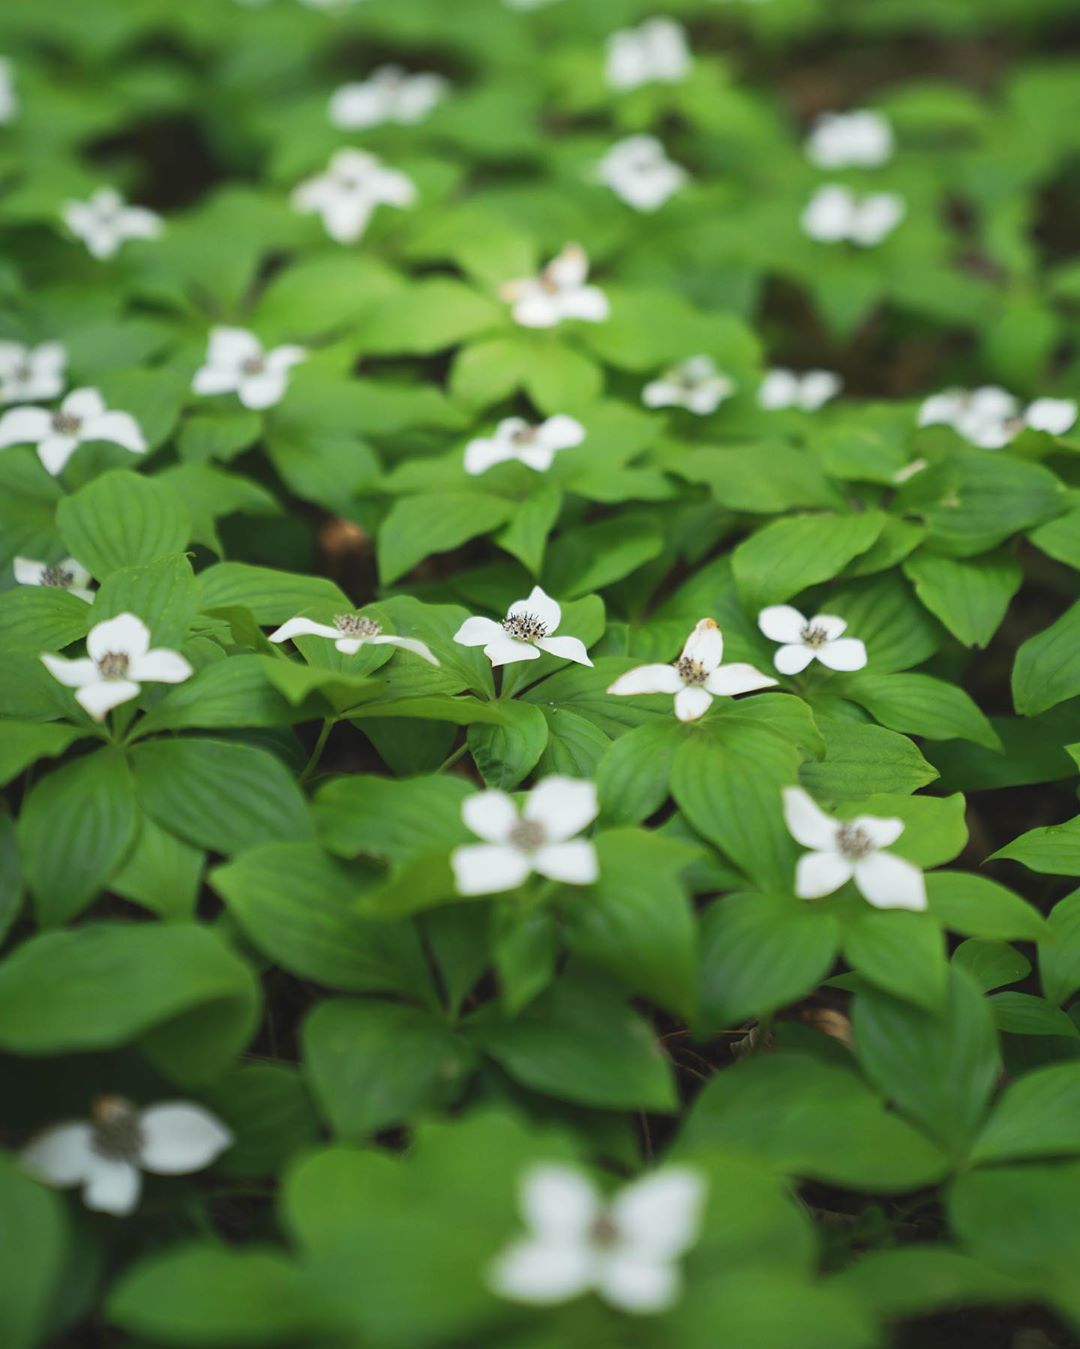 Bunchberry flowers, little white four petaled flowers dotted over green vegetation